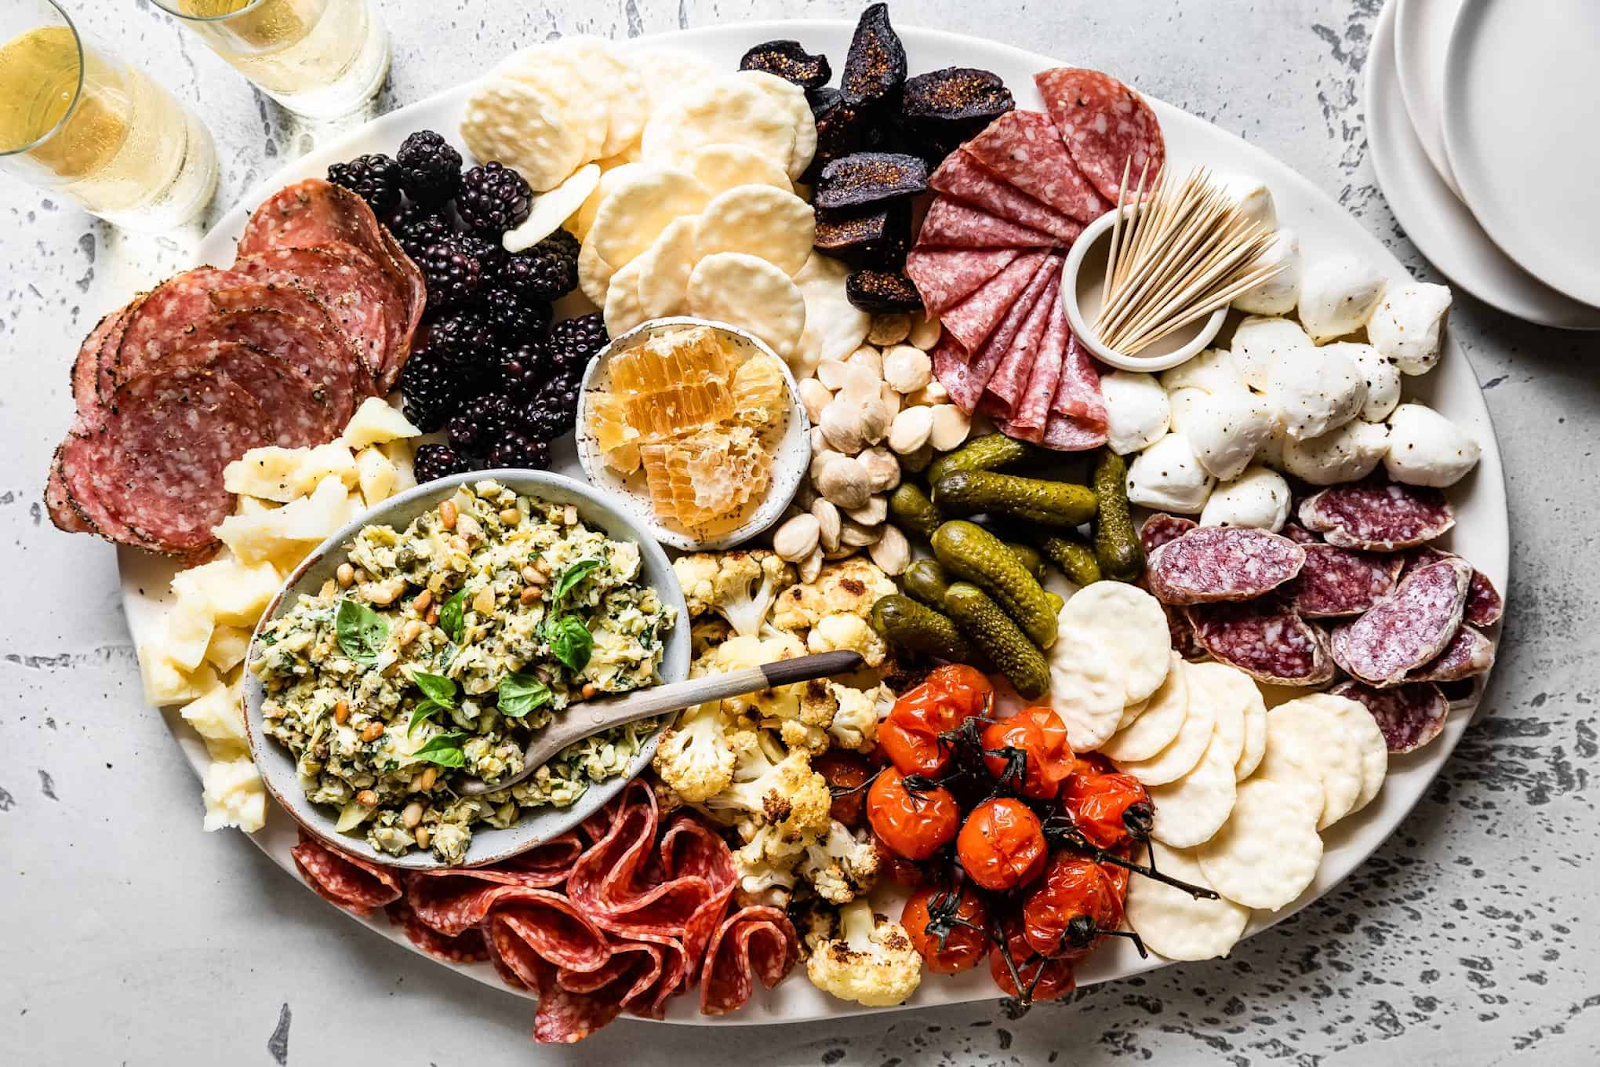 A classic charcuterie board filled with meats, cheeses, veggies and preserves.